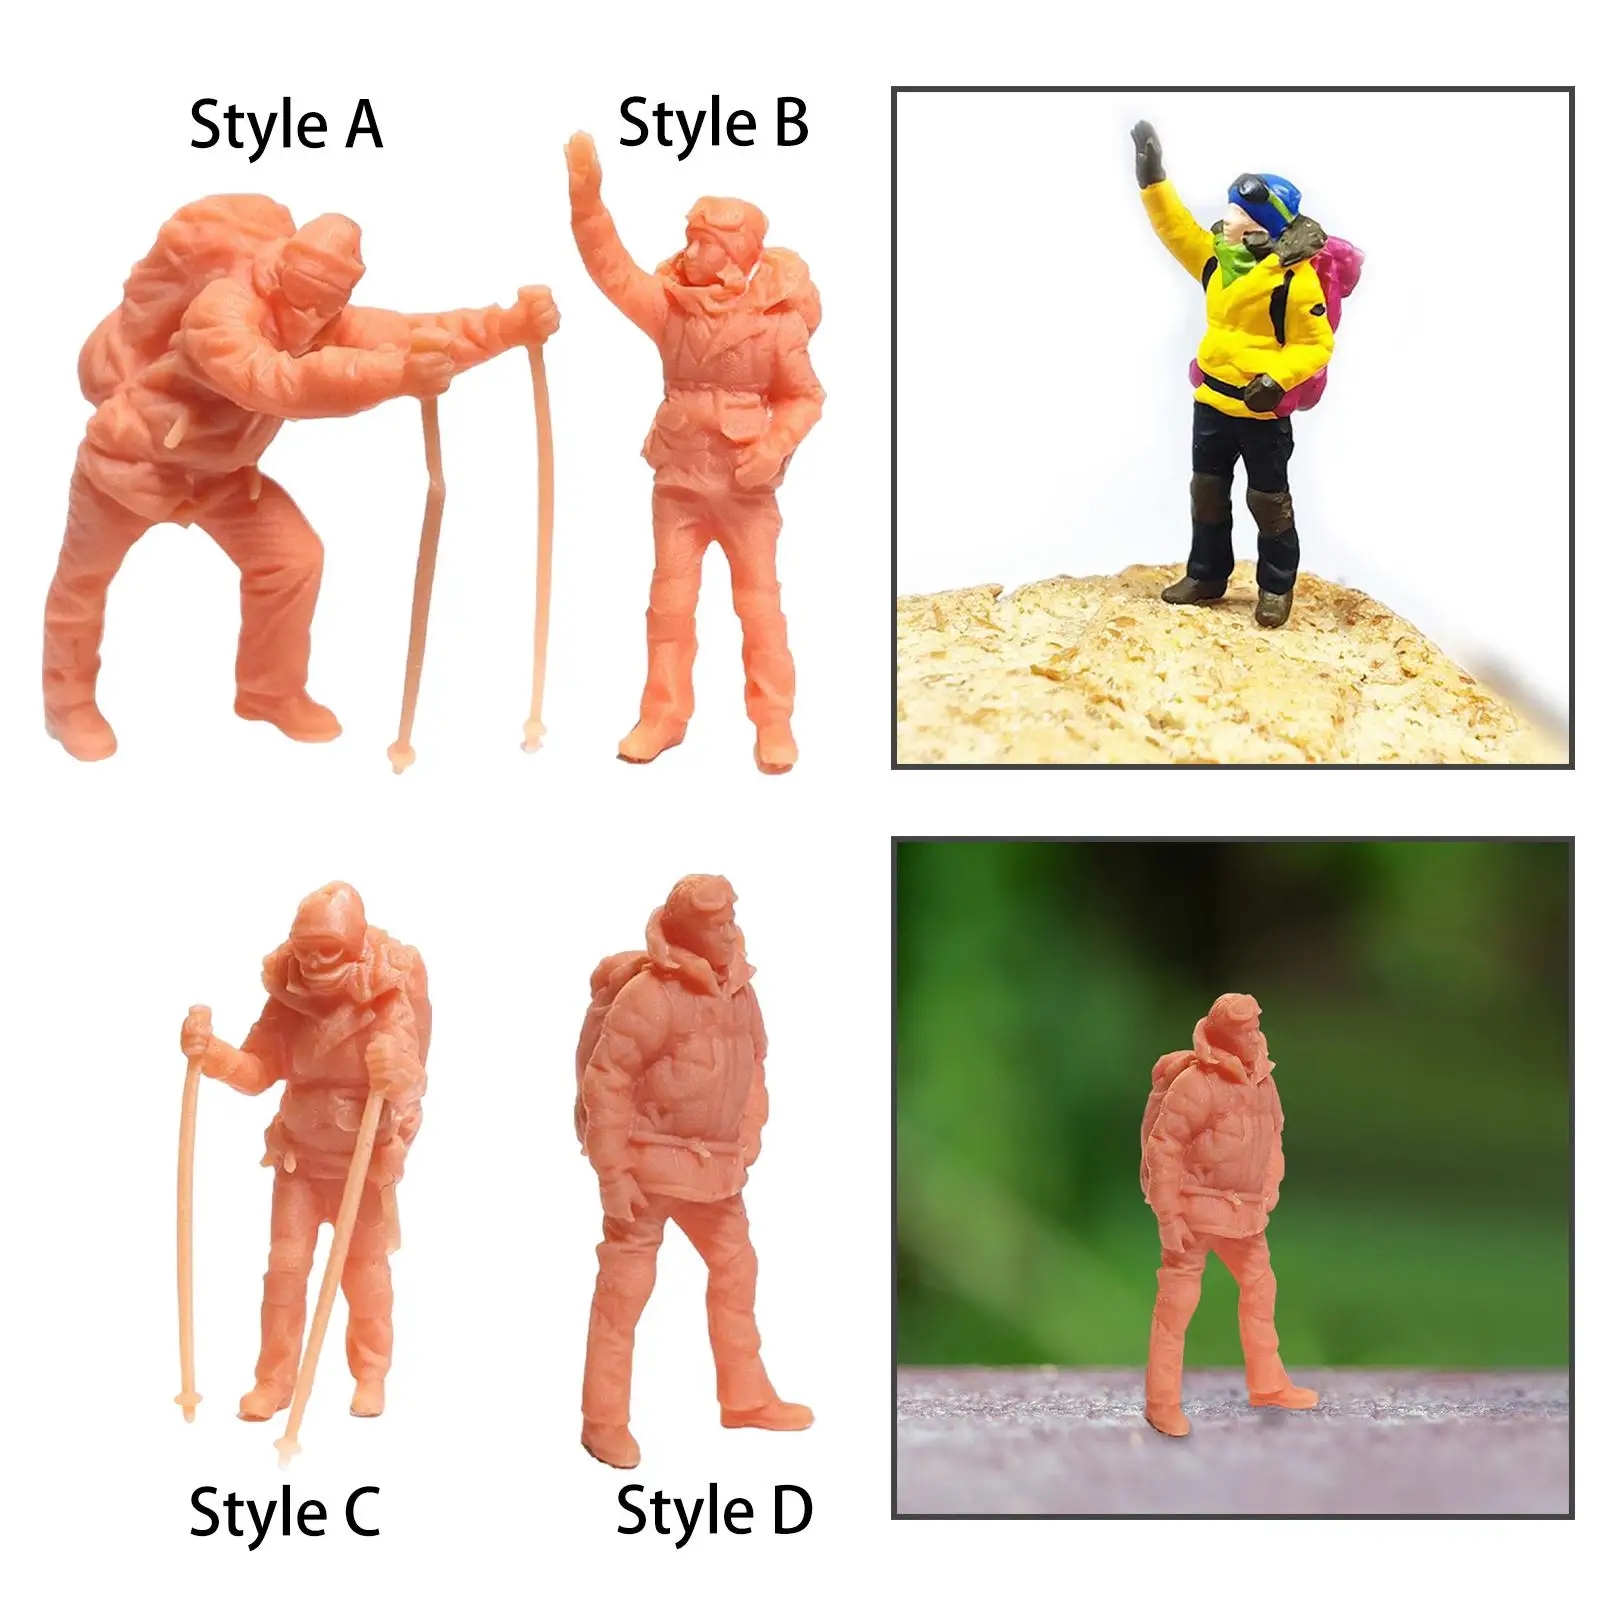 People Figurines 1/64 Unpainted Figures Miniature for Fairy Garden Architectural Layout Project Trains Decoration Collectibles